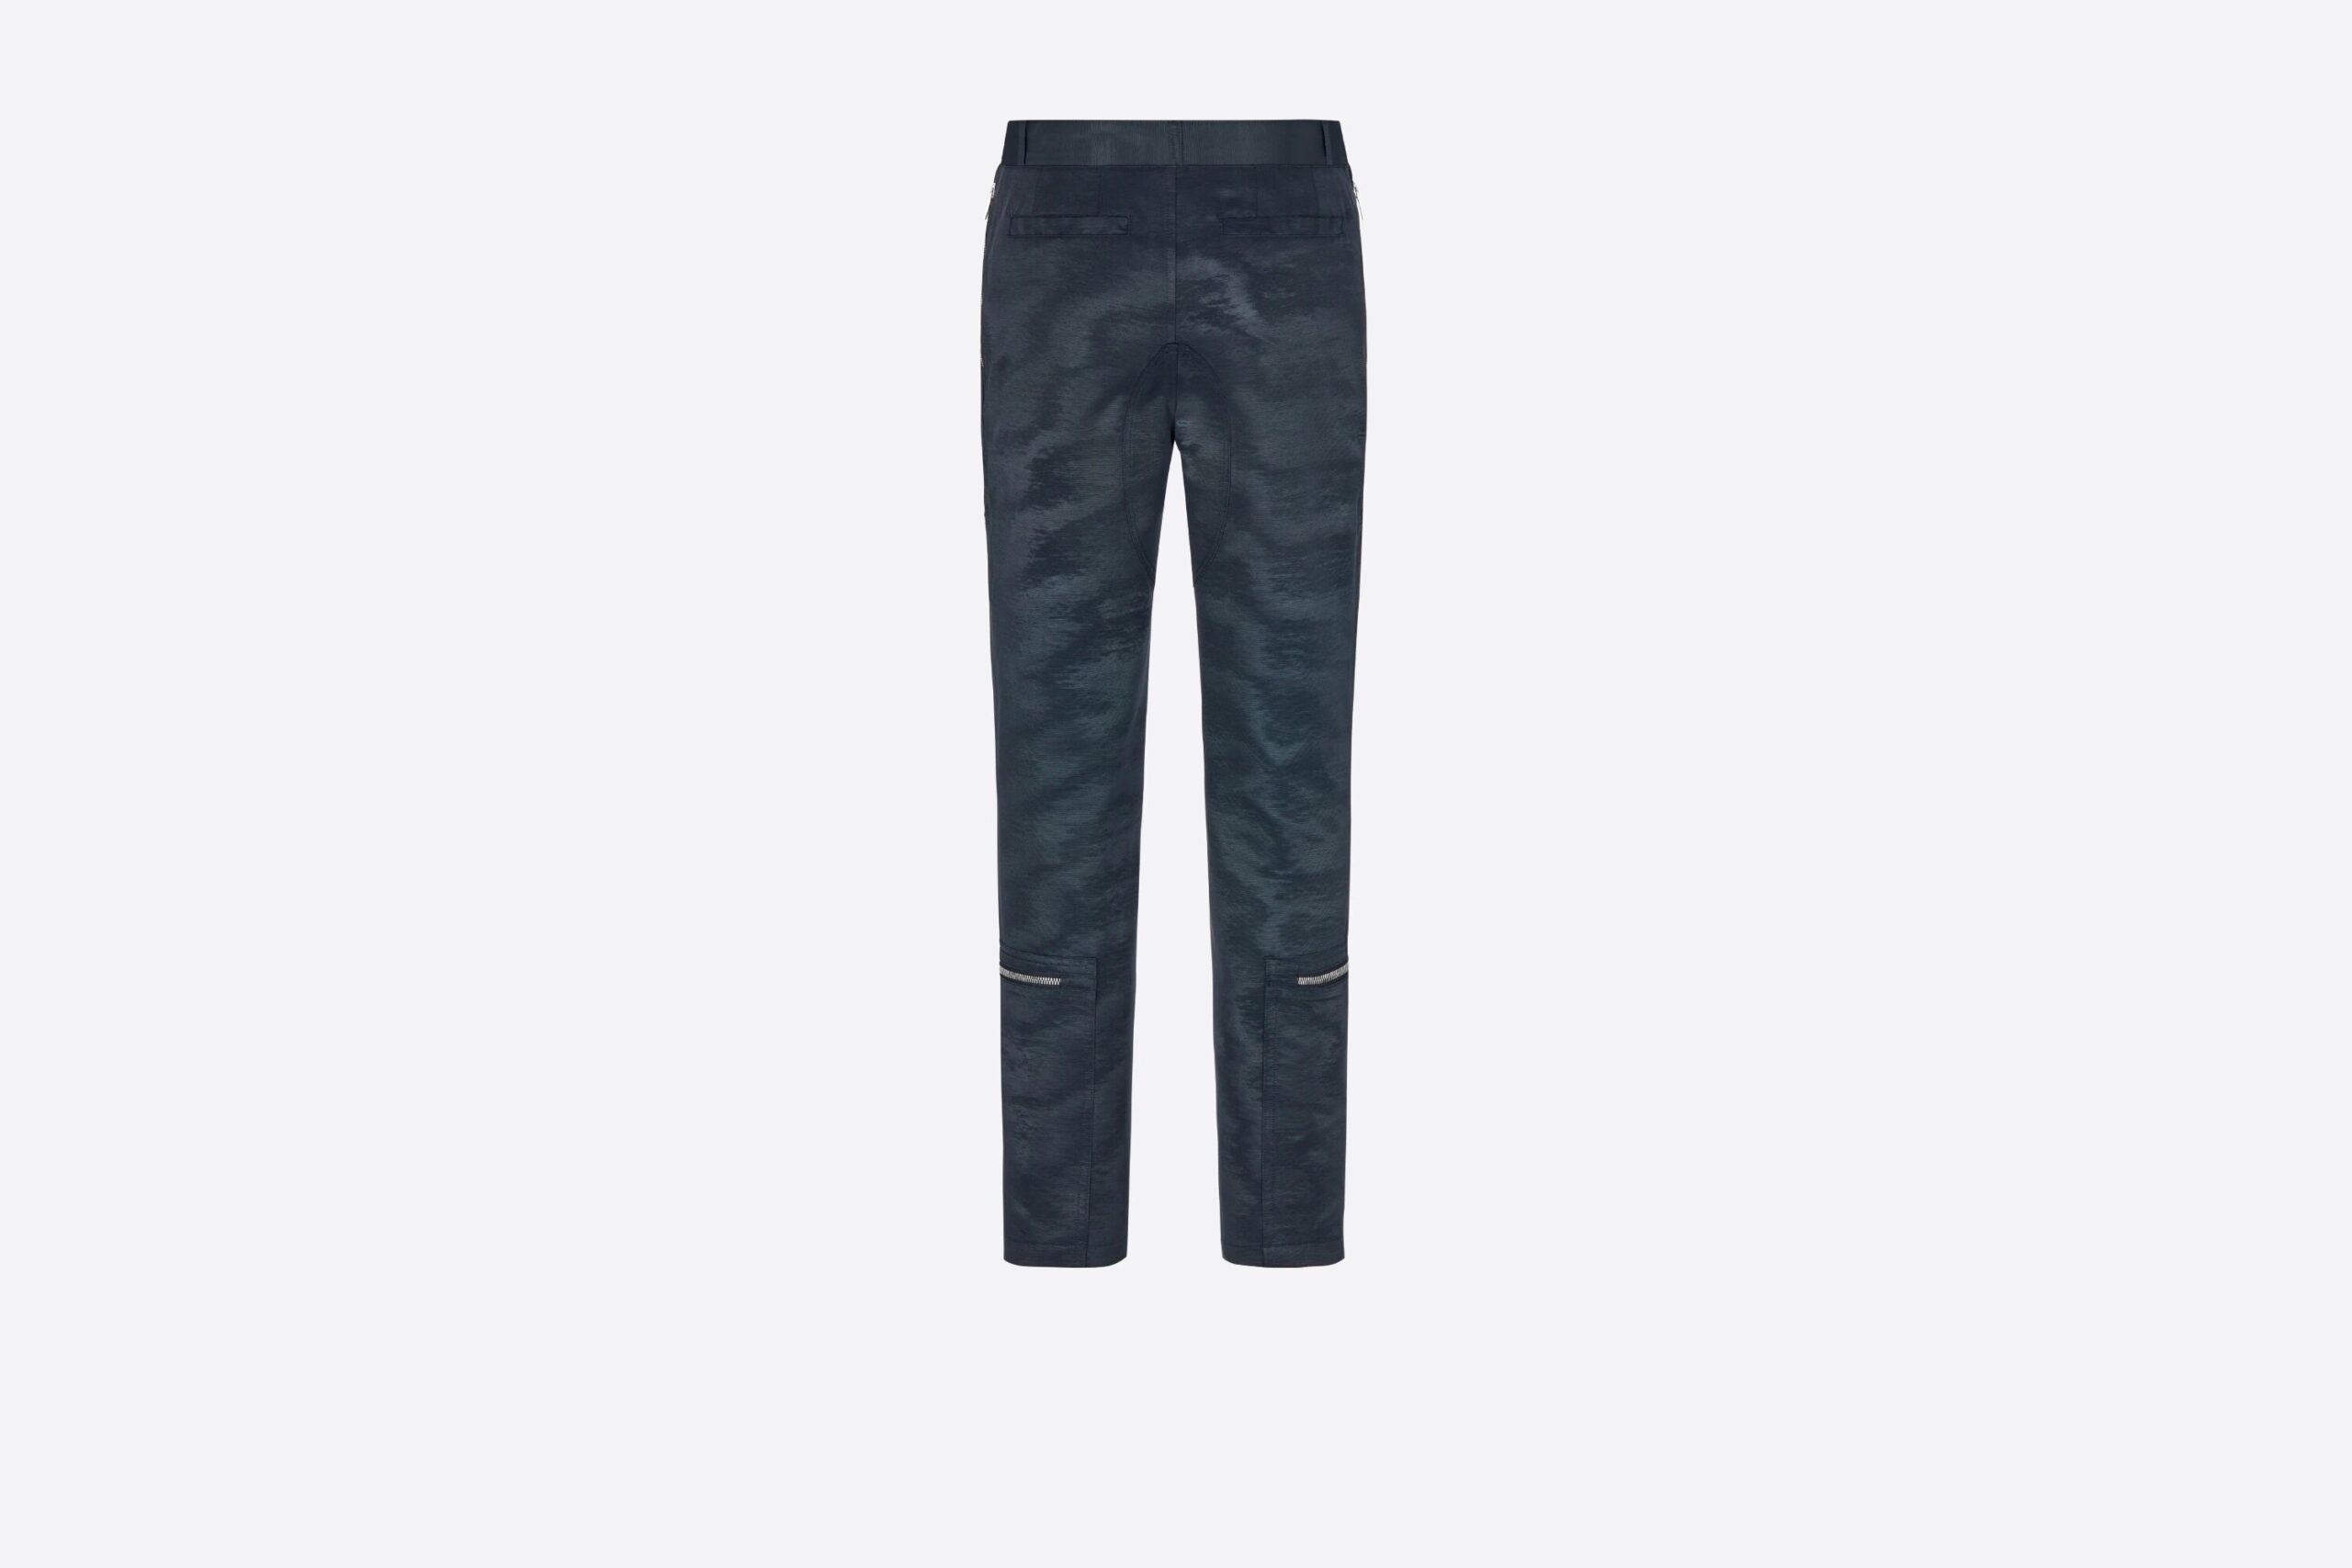 UTILITY PANTS WITH ZIPPER POCKETS - Clothes Rep